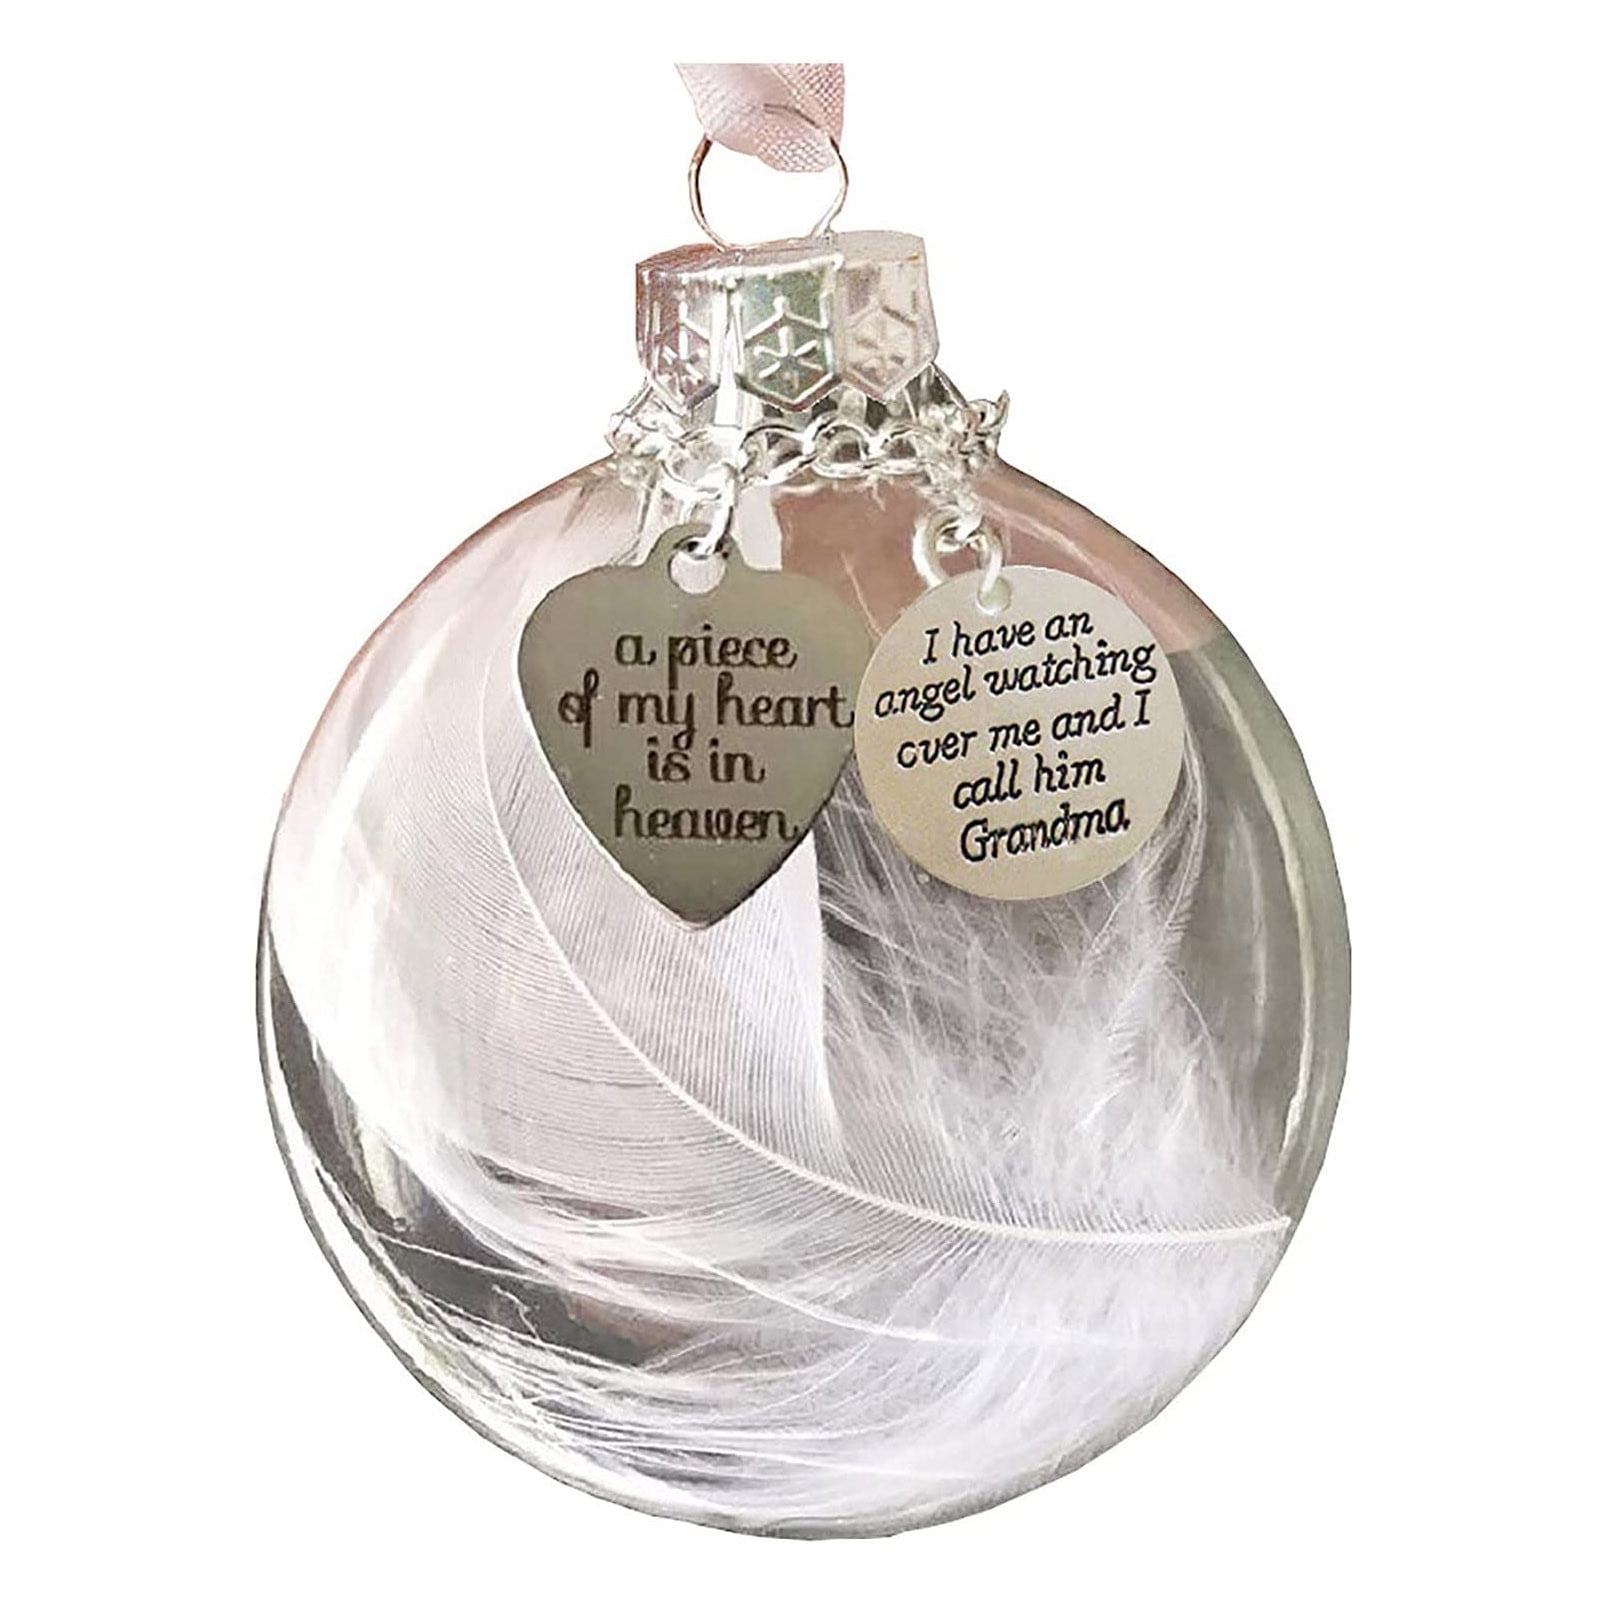 Heavenly Angel Personalized Christmas Ornament Angel Girl Dove Angel Ornament Personalized Christmas Ornament Little Girl Ornament